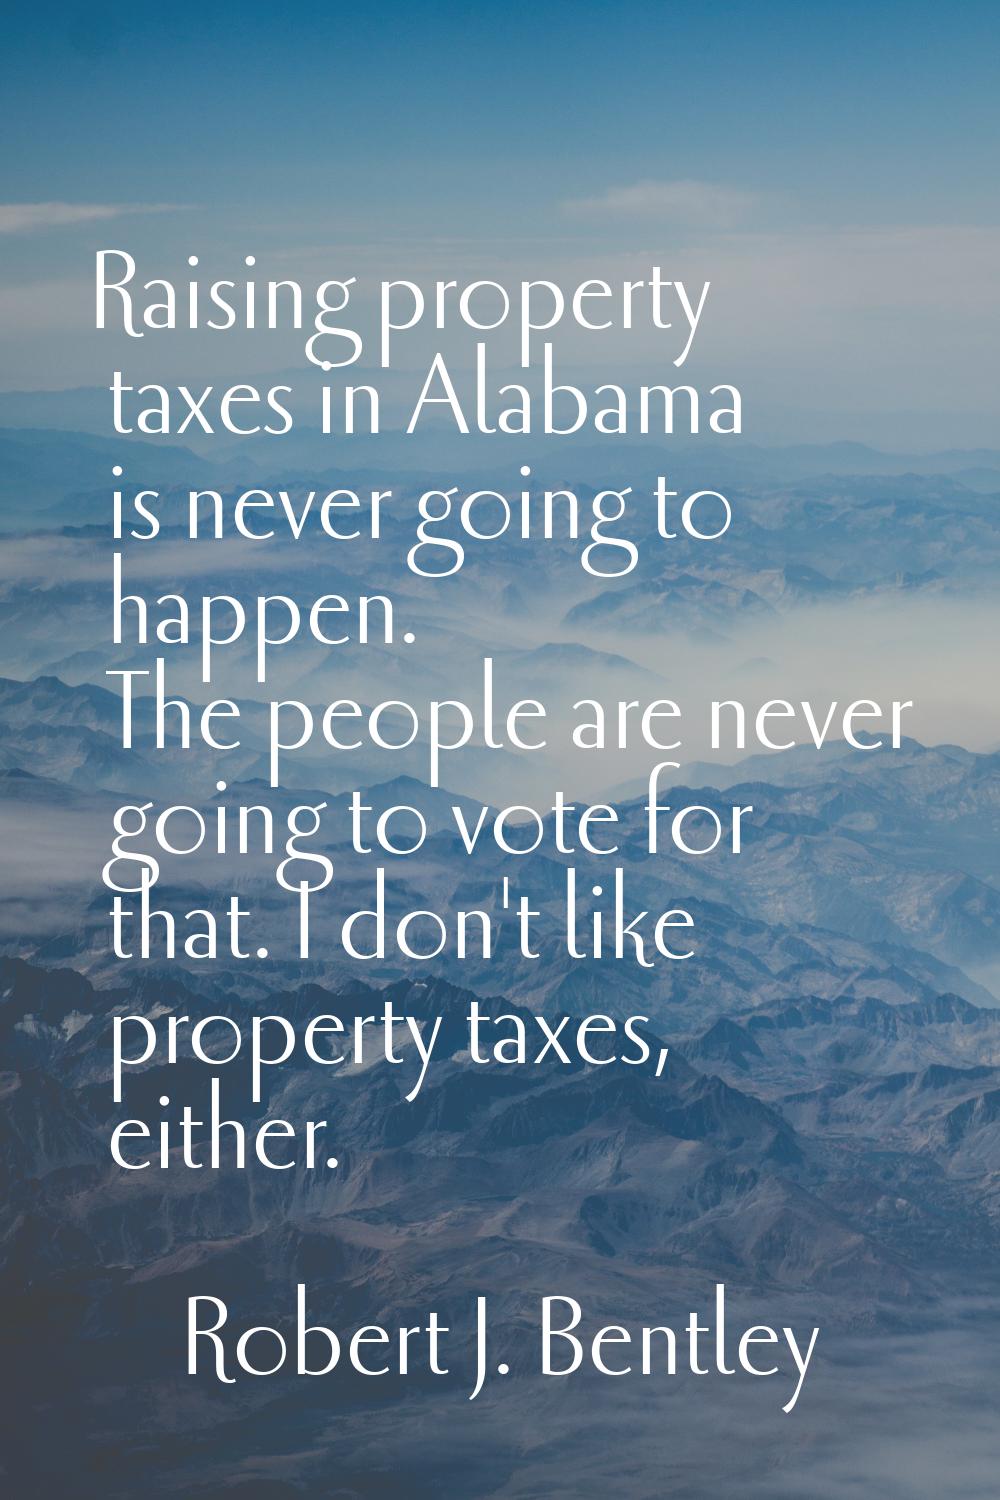 Raising property taxes in Alabama is never going to happen. The people are never going to vote for 